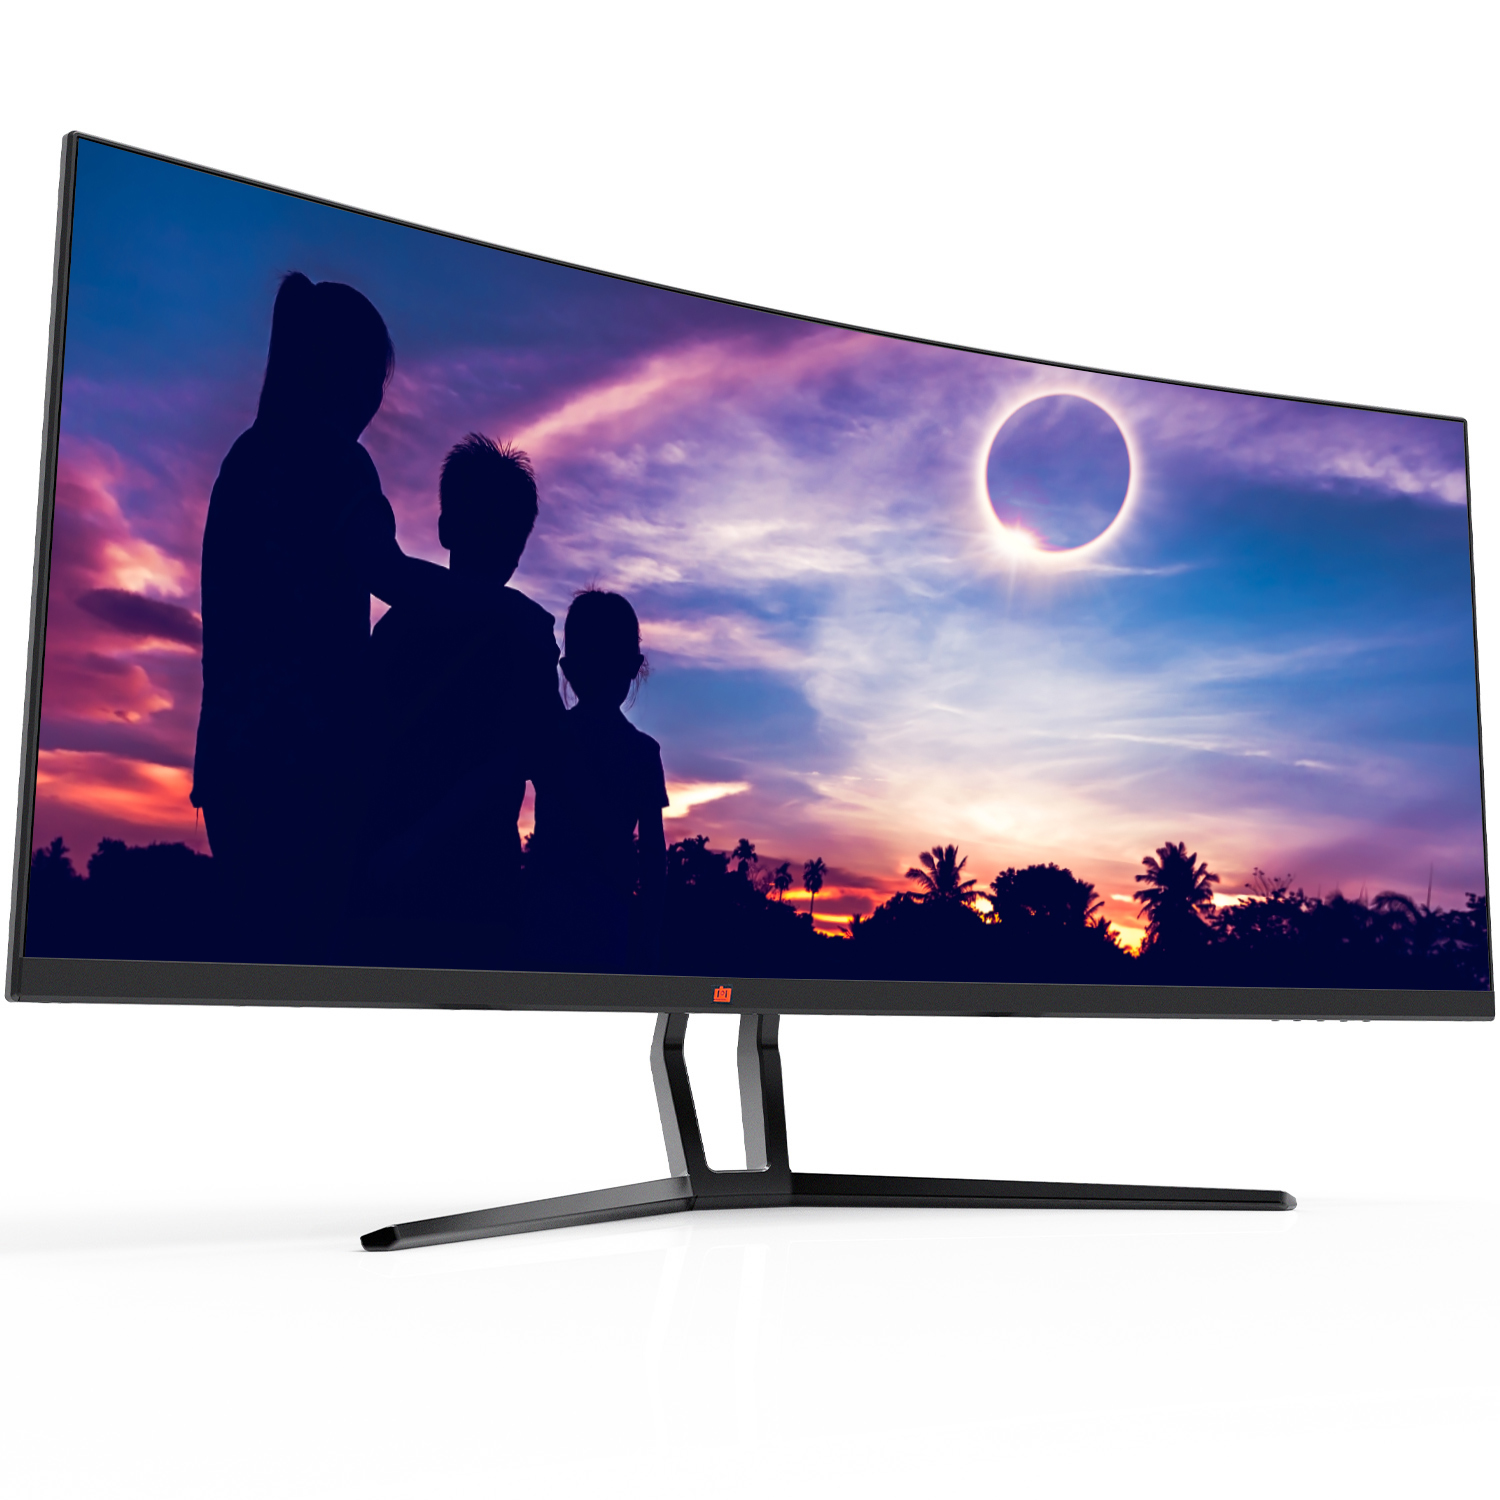 Deco Gear DGVIEW201 35″ (3440×1440) 21:9 100Hz Curved Ultrawide LED Gaming Monitor